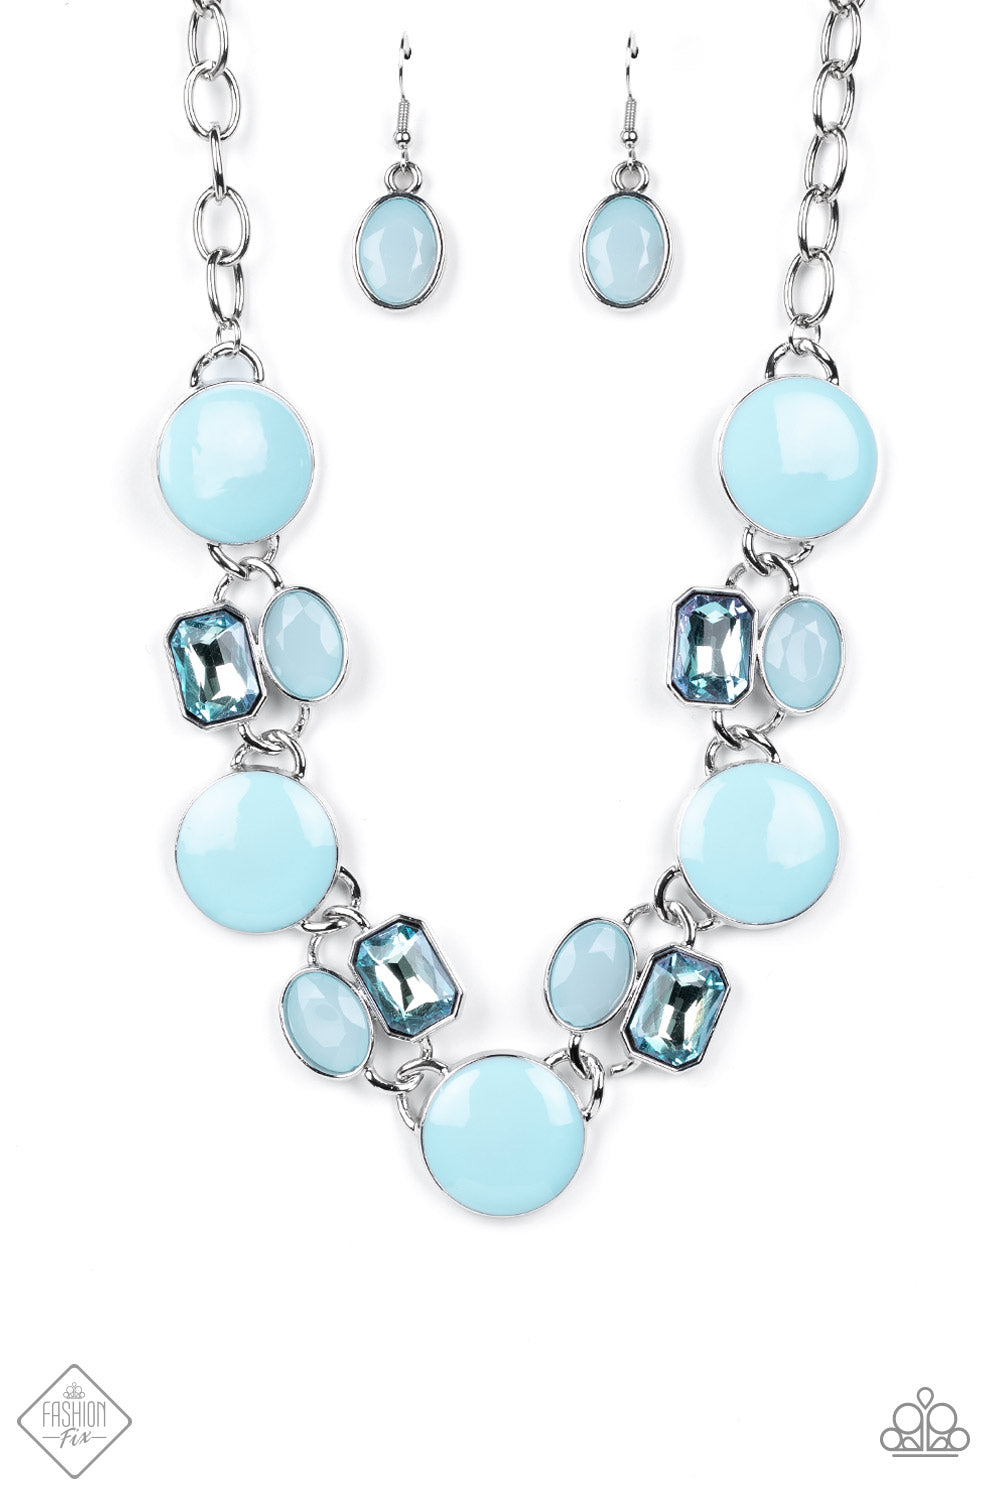 Dreaming in MULTICOLOR - Blue Necklace (GM-0522)